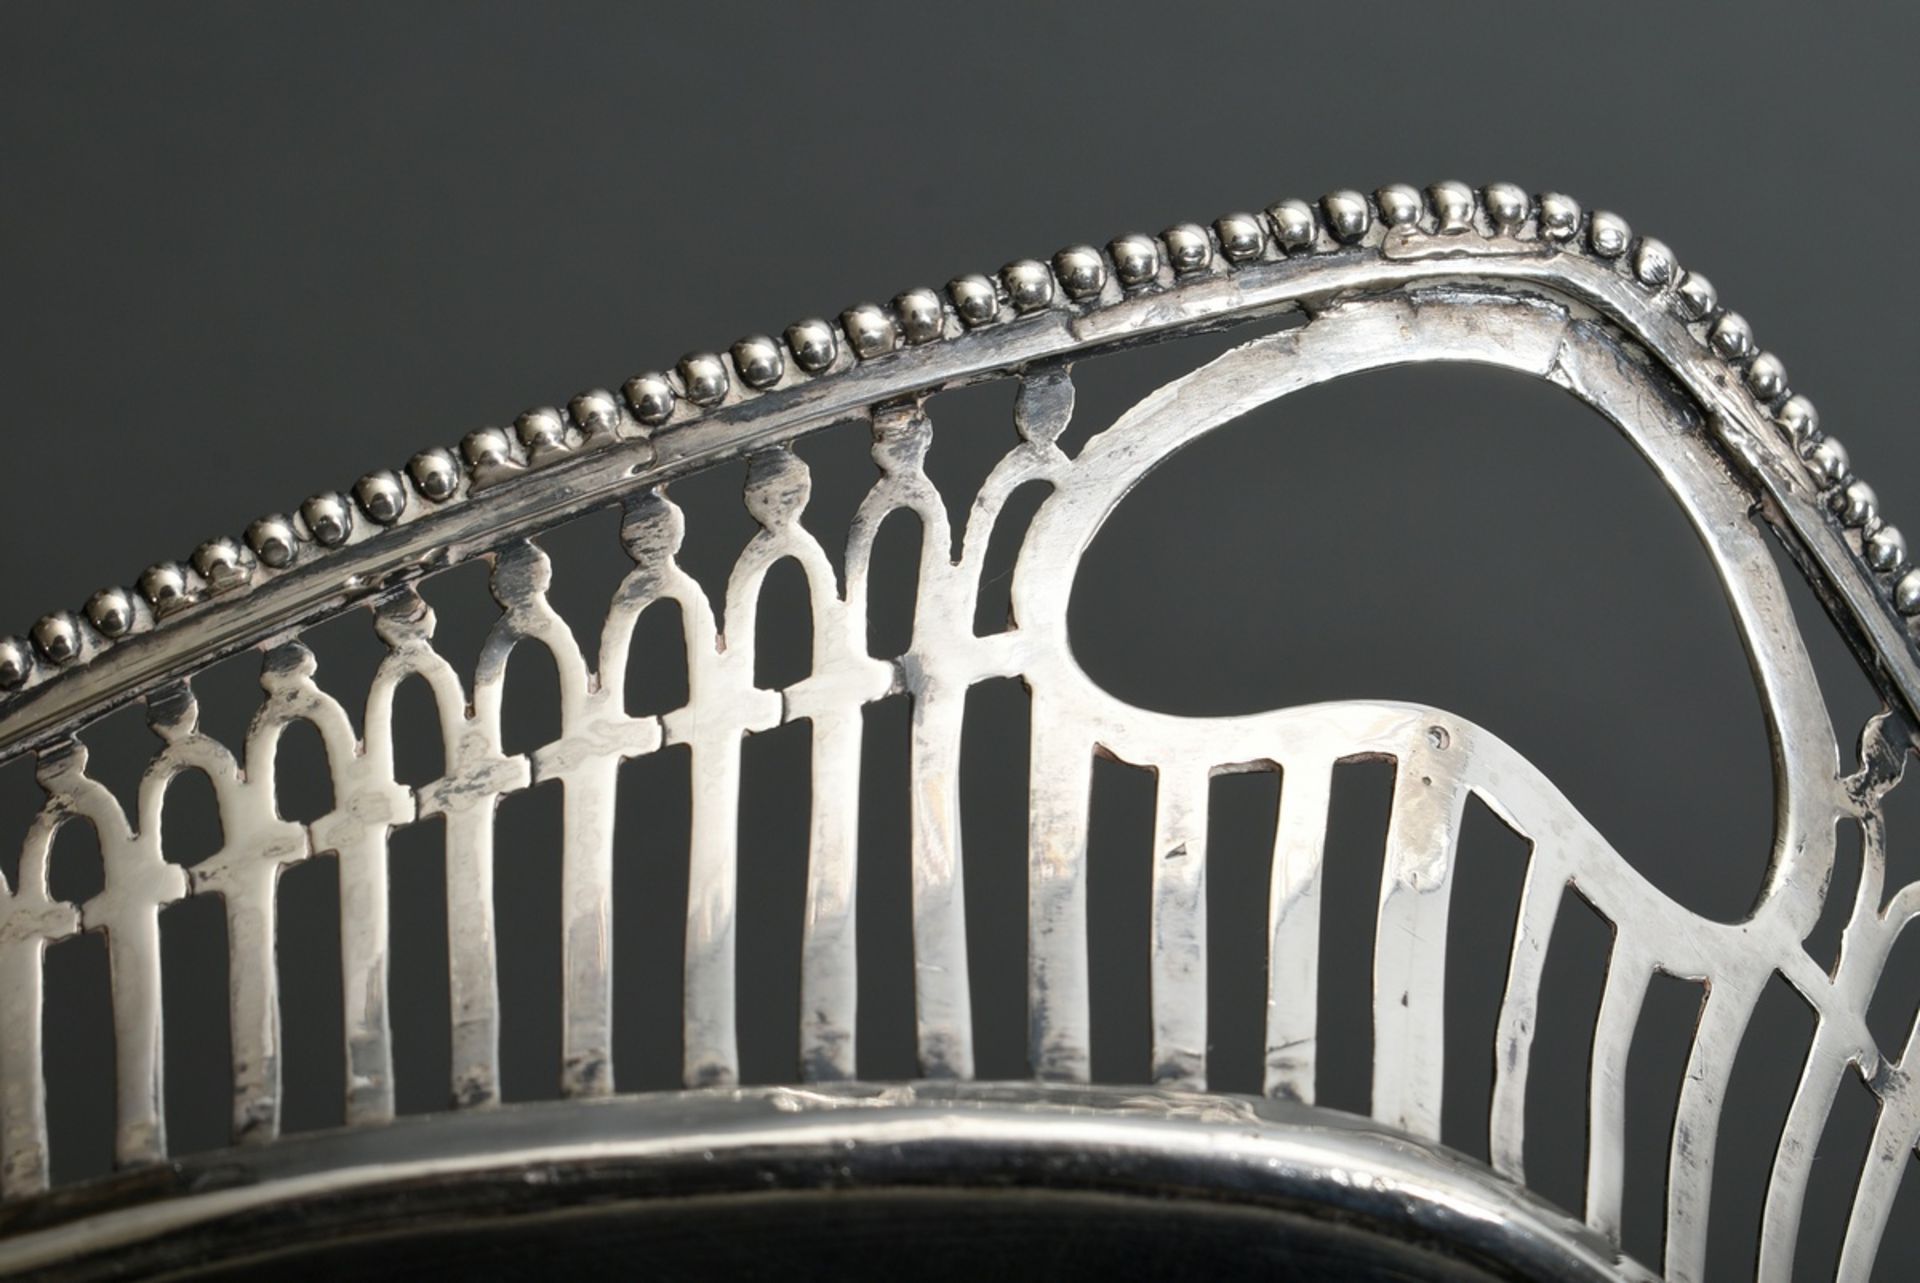 Dutch tray with lattice opening and beaded rim, MM: JdV (?), year mark 1915, silver 833, 1480g, 56x - Image 3 of 5